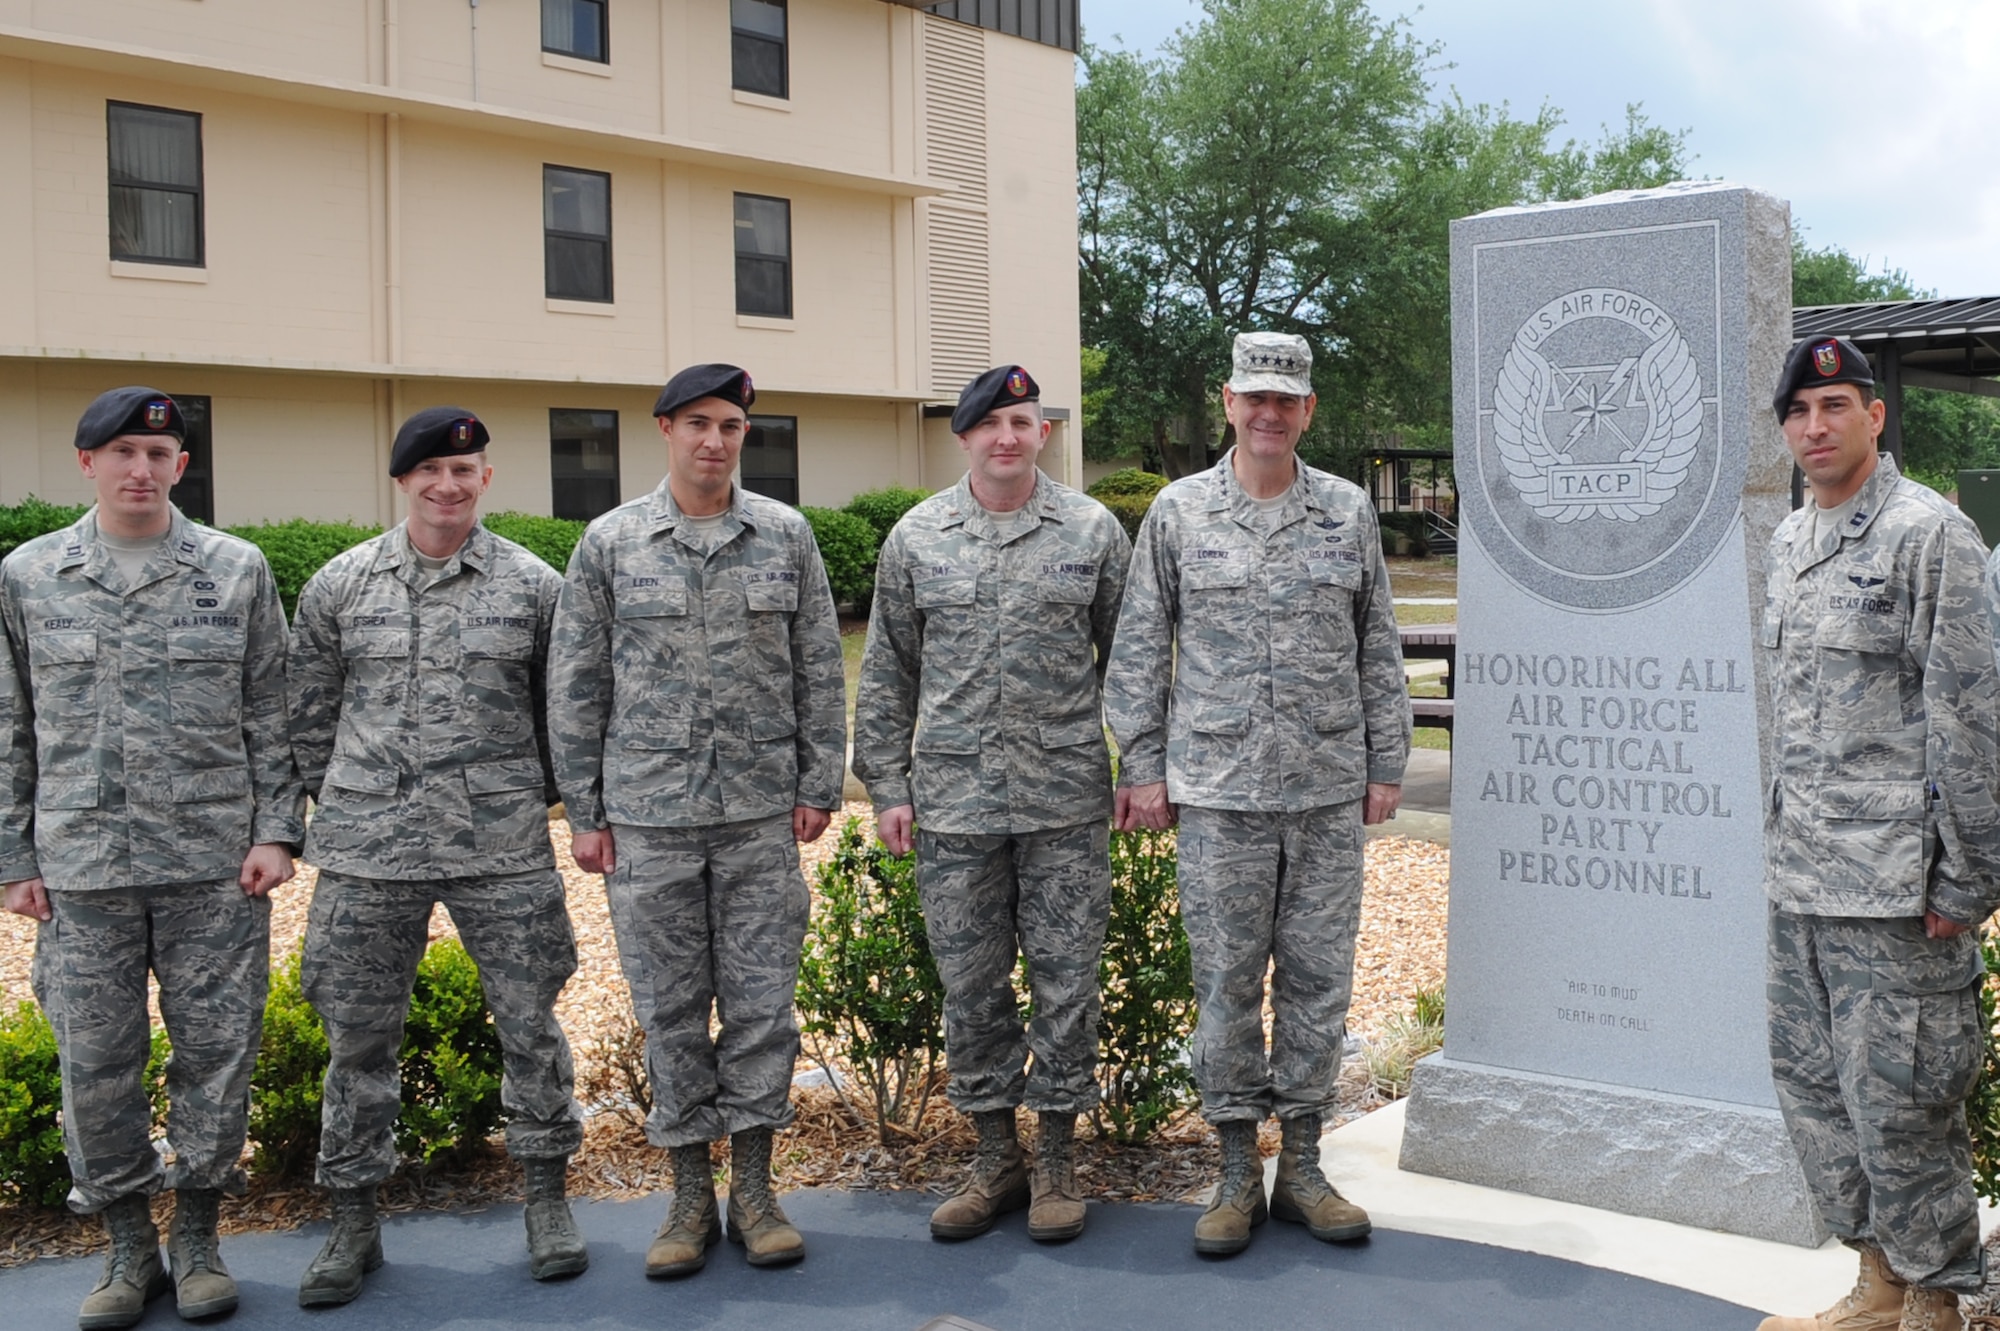 From left to right, Capt. Matthew Kealy, 2nd Lt. Eamonn O’shea, 1st Lt. Brian Leen and 2nd Lt. John Day pose in front of a memorial alongside General Stephen Lorenz, Air Education and Training Command commander and Capt. Christopher Wright, 342nd Training Squadron Detachment 3 commander, after graduating from the Terminal Air Control Party schoolhouse April 27. The Airmen were the first non-rated officers to graduate from the schoolhouse and become air liaison officers in Air Force history. (DoD photo by Air Force Airman Caitlin O'Neil-McKeown)